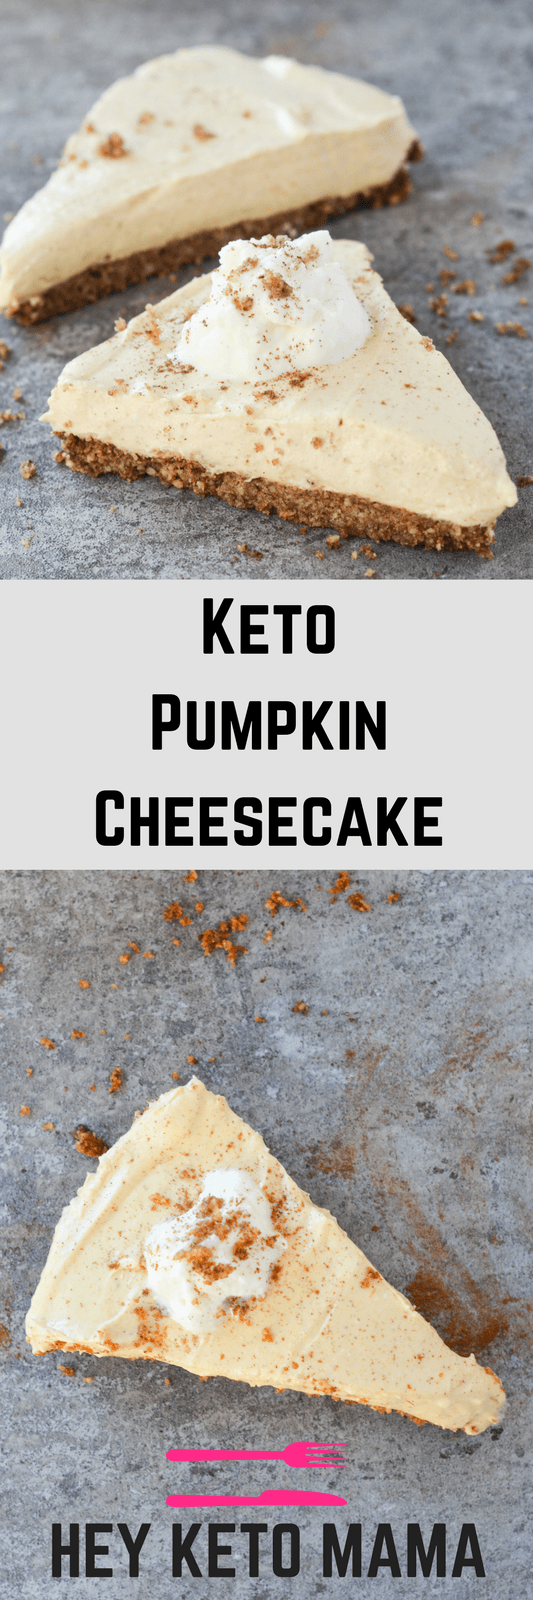 Keto Pumpkin Cheesecake is always the answer, no matter the question. Check out this easy recipe to make a Fall favorite low carb style! | heyketomama.com